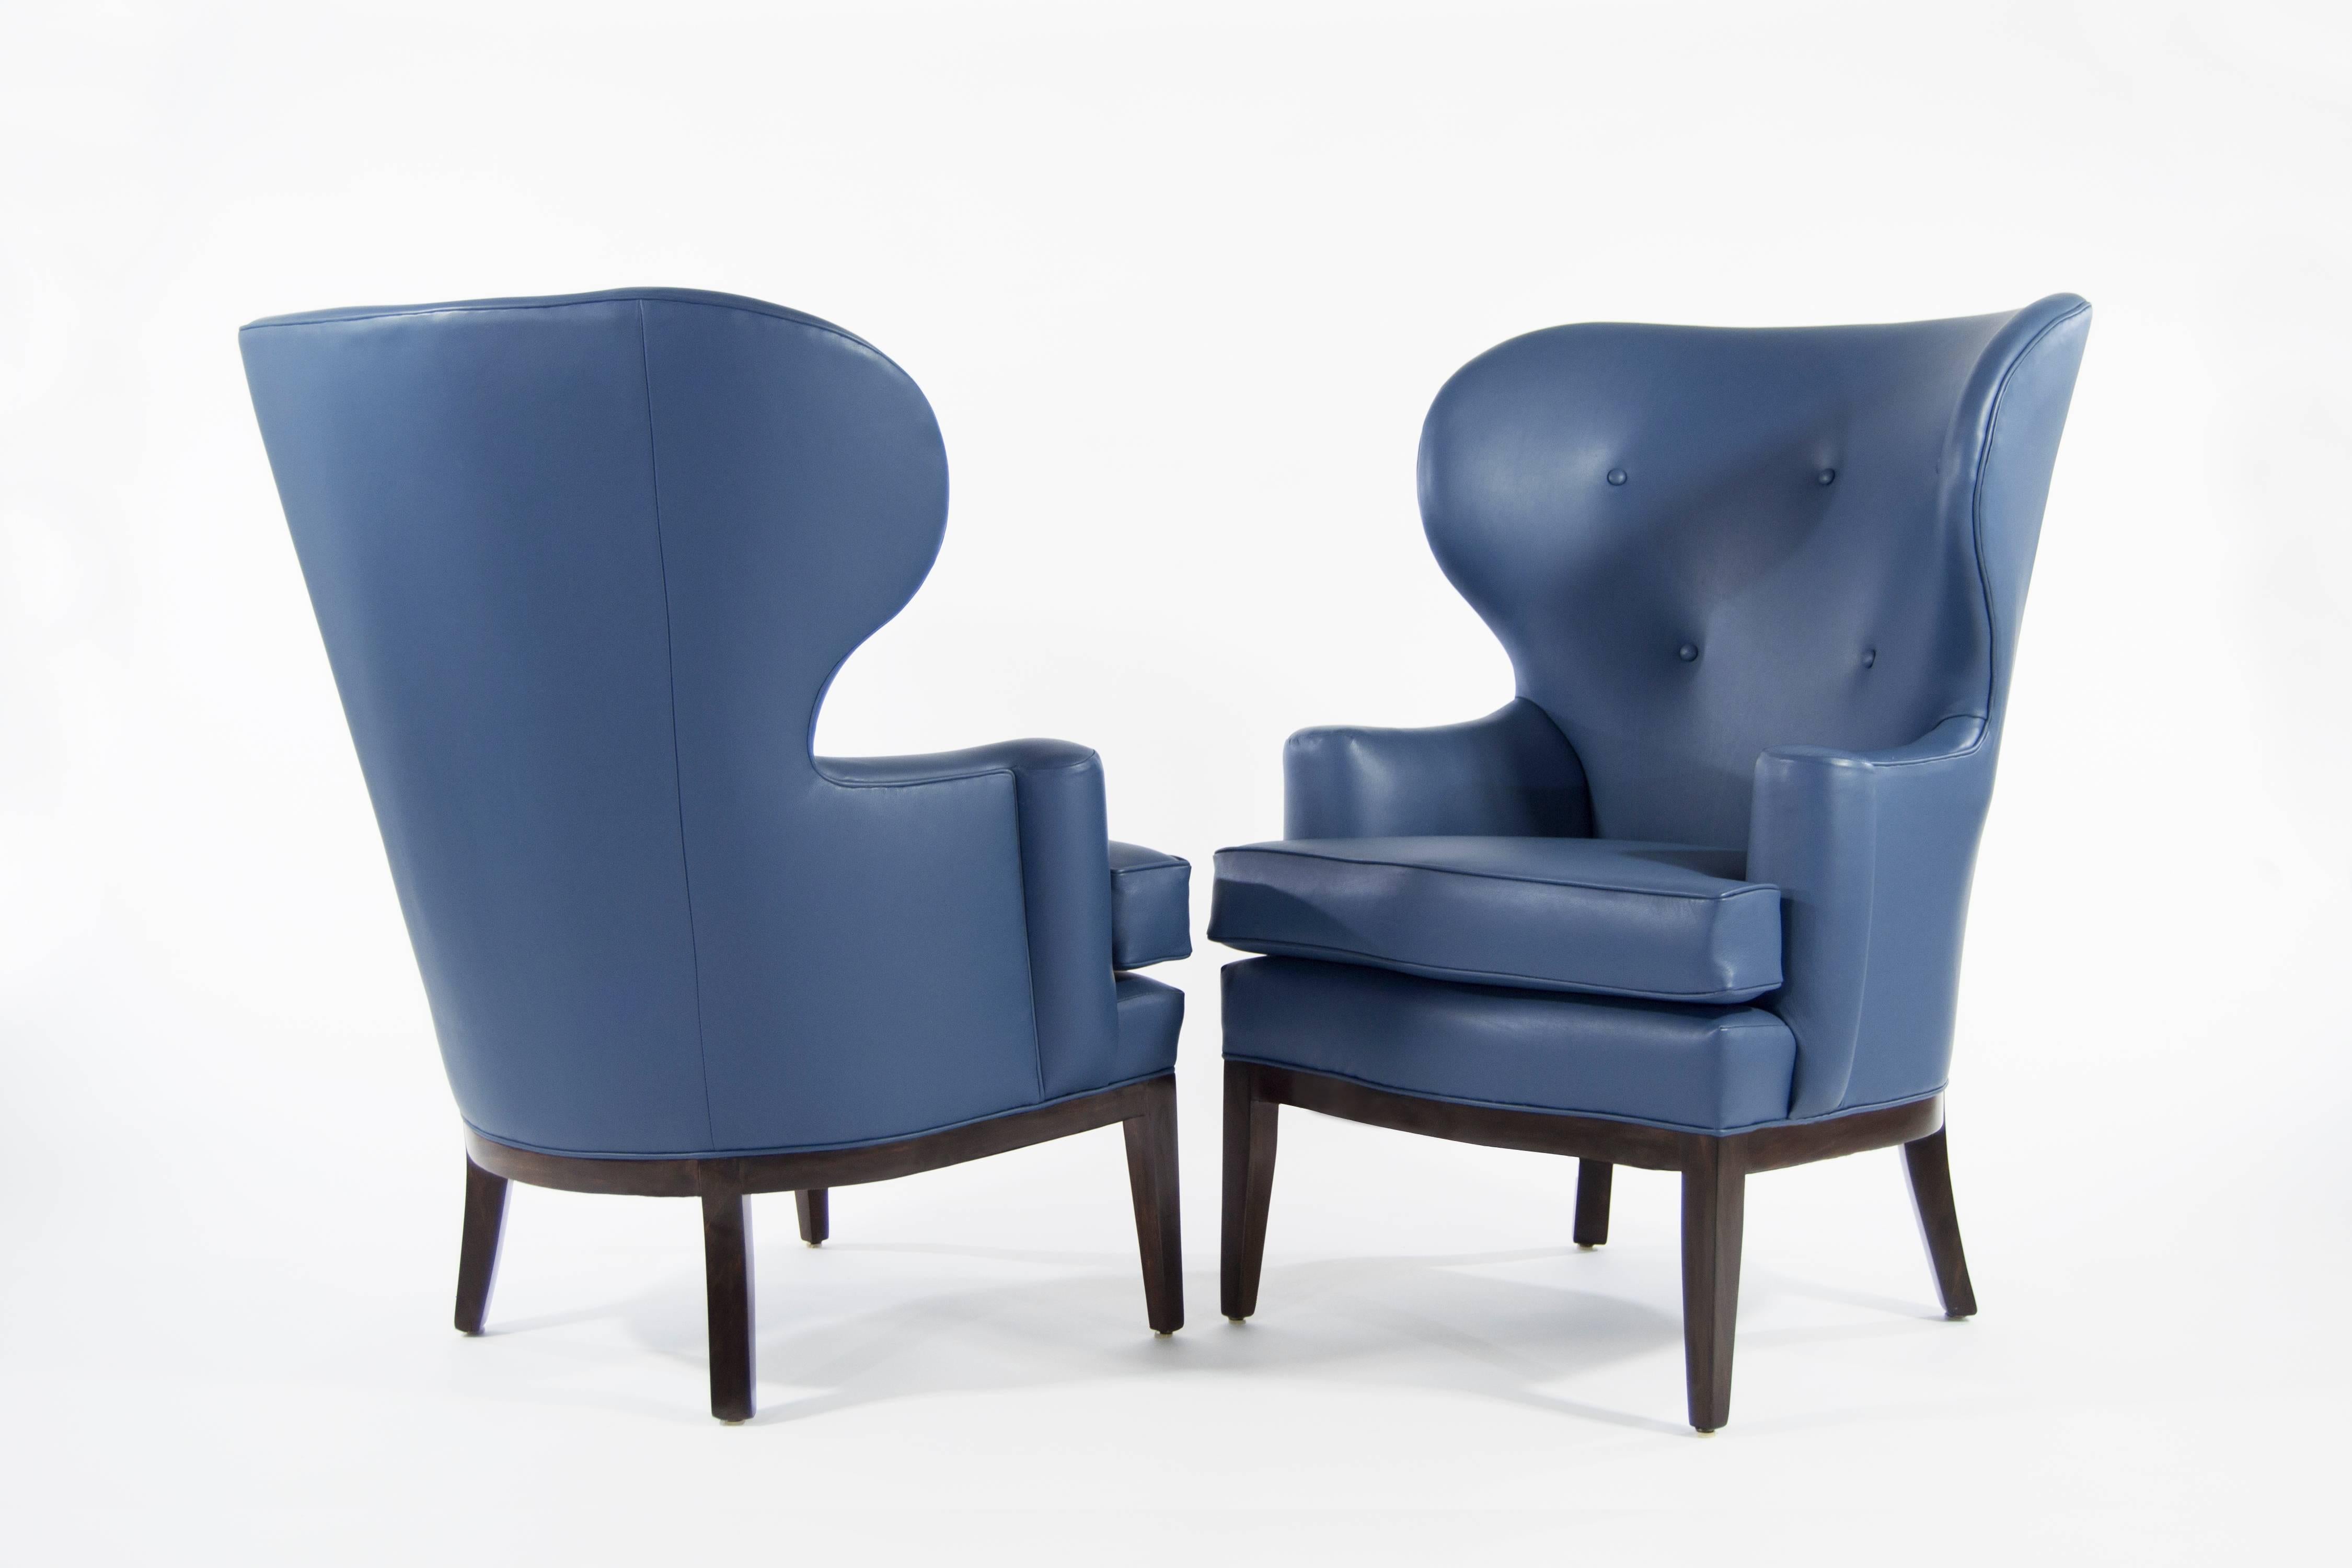 Mid-Century Modern Early Wingback Chairs by Edward Wormley for Dunbar, circa 1940s